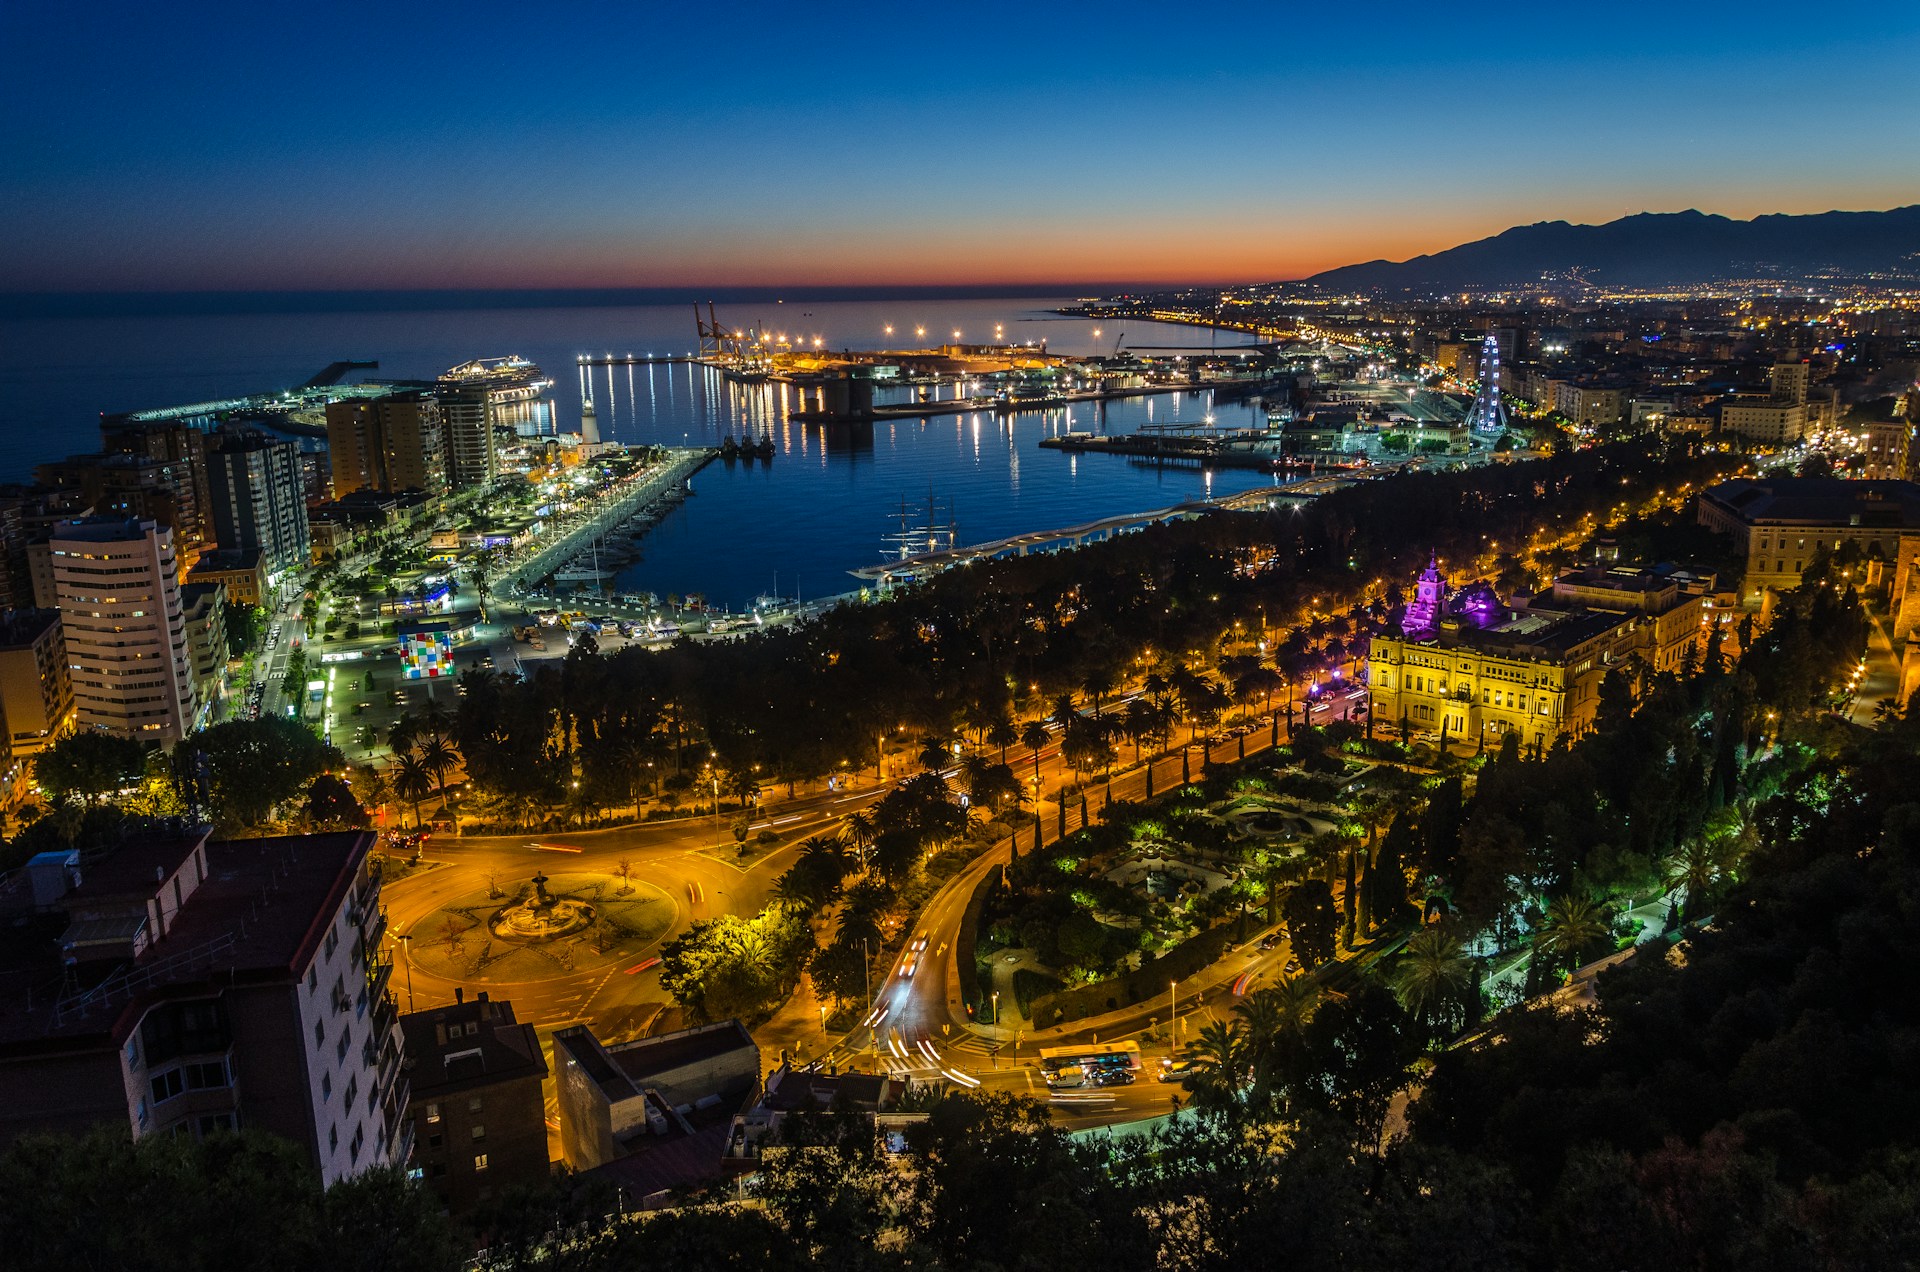 Areal view of Malaga